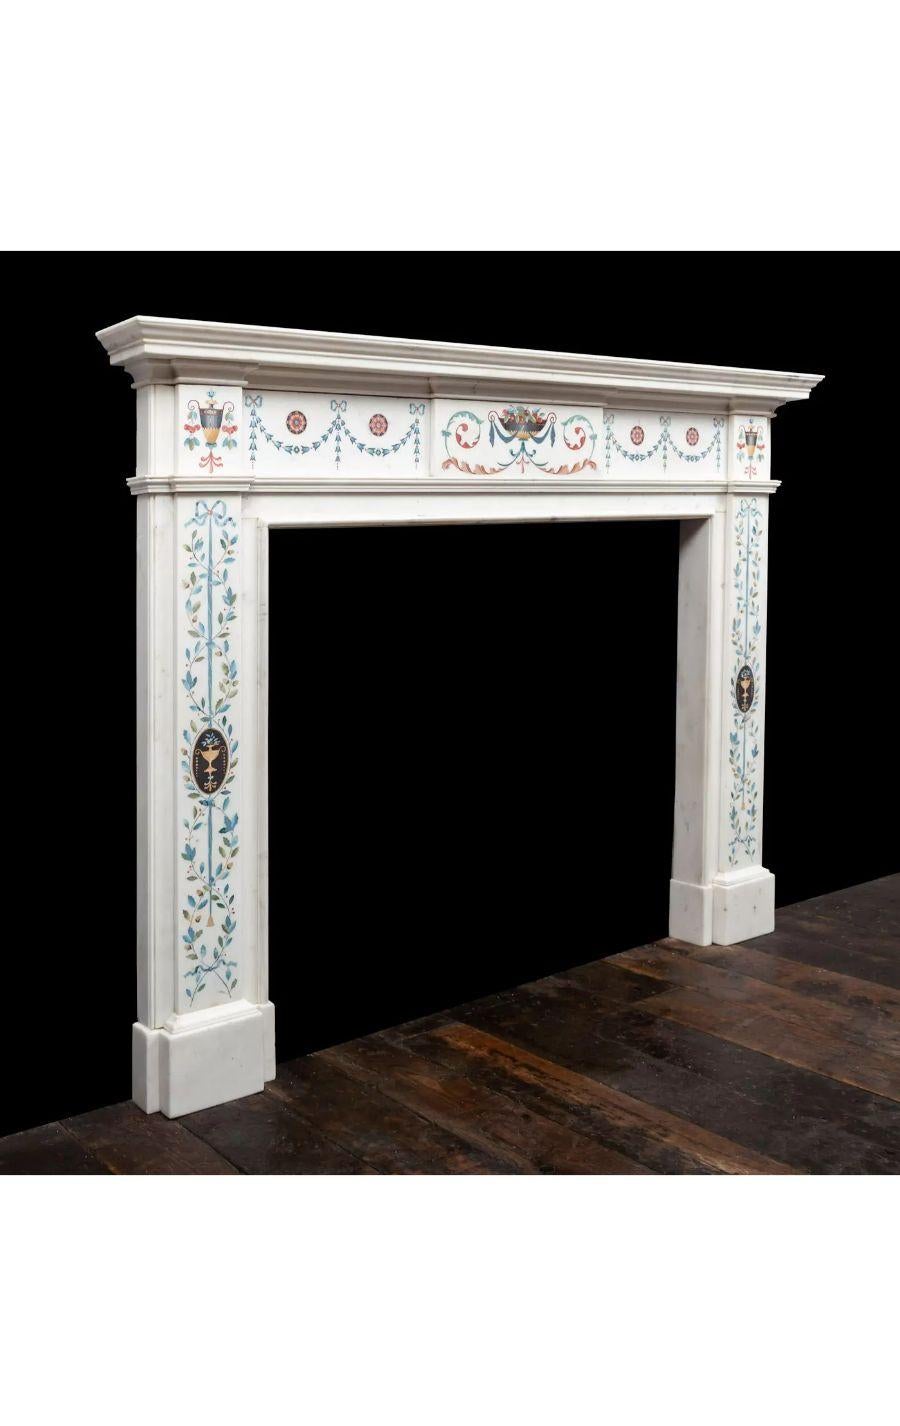 18th Century White Italian Statuary Marble Bossi Fireplace

An Irish antique Georgian Statuary marble and scagliola mantlepiece in the manner of Pietro Bossi

This beautiful and decorative fireplace is made from white Italian statuary marble with